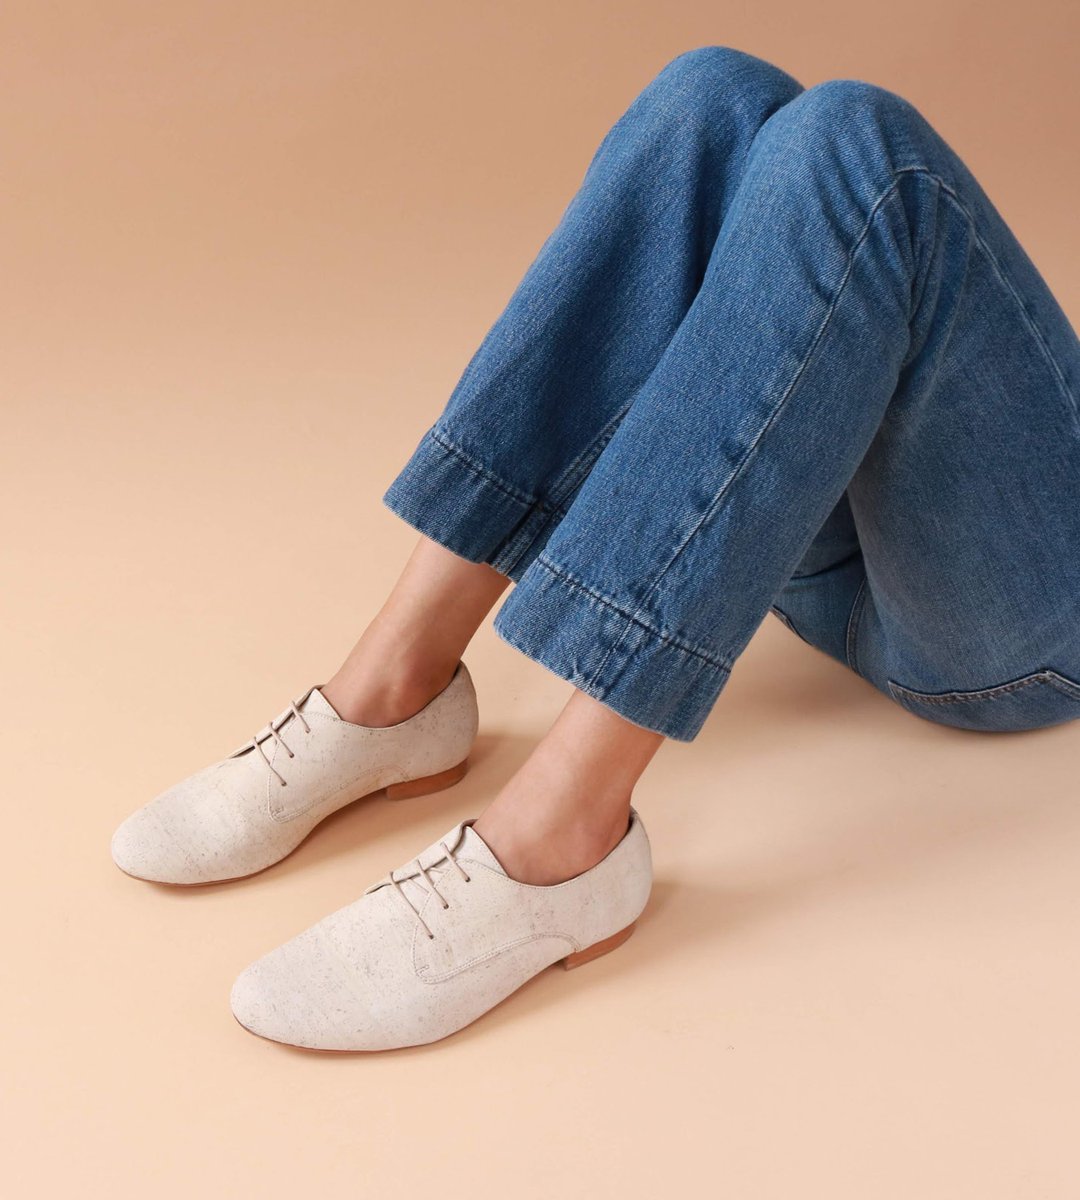 sustainably made shoes